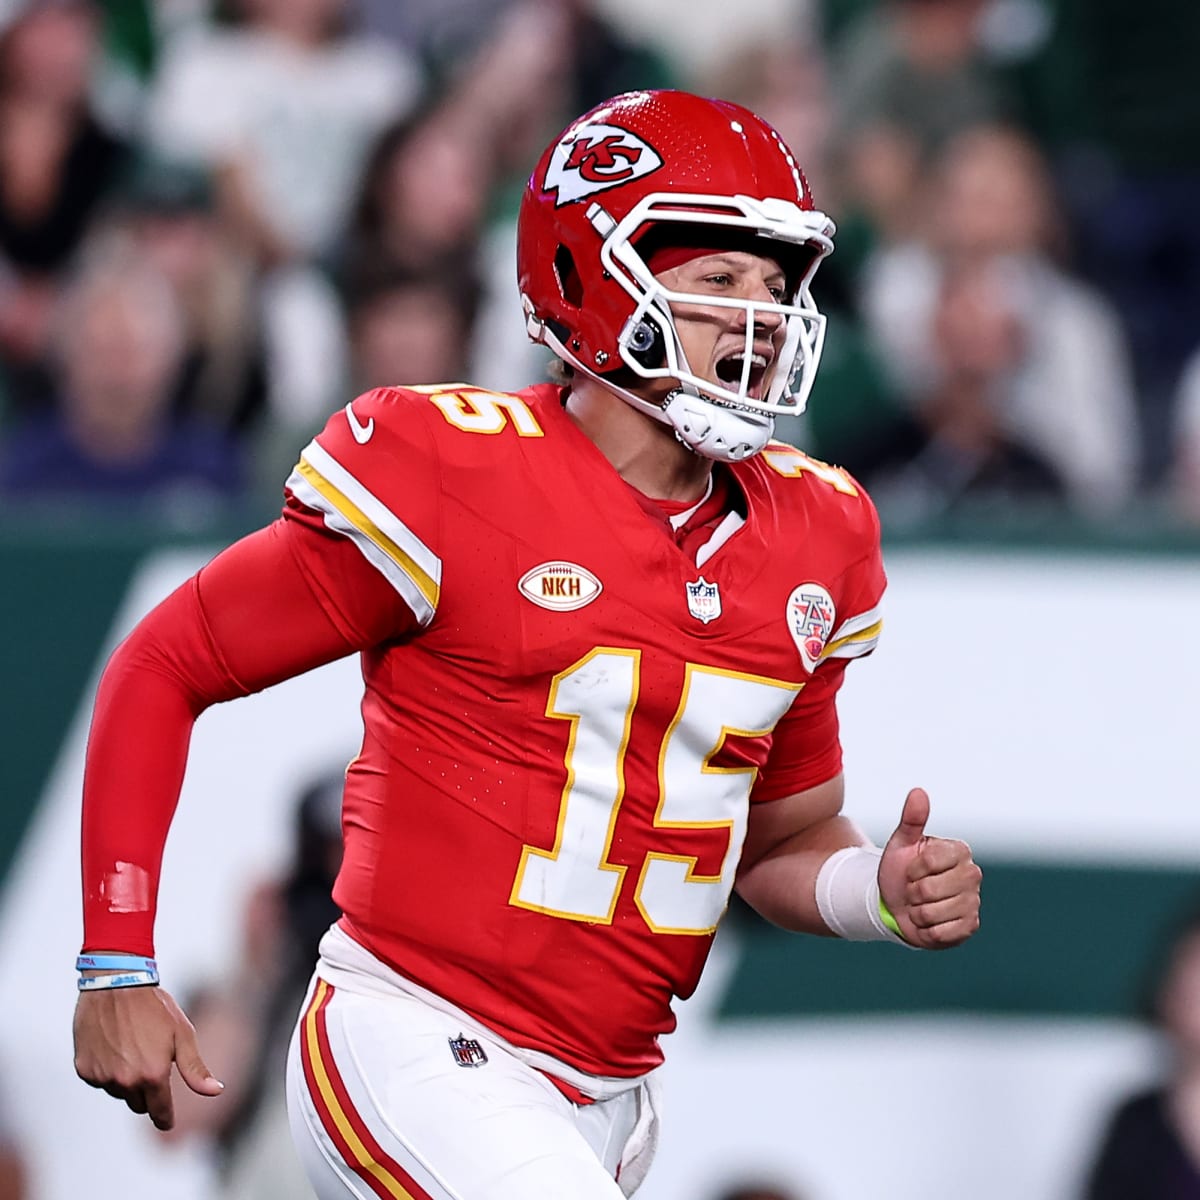 Patrick Mahomes Cost NFL Fans 'Tens Of Millions' On Sunday Night